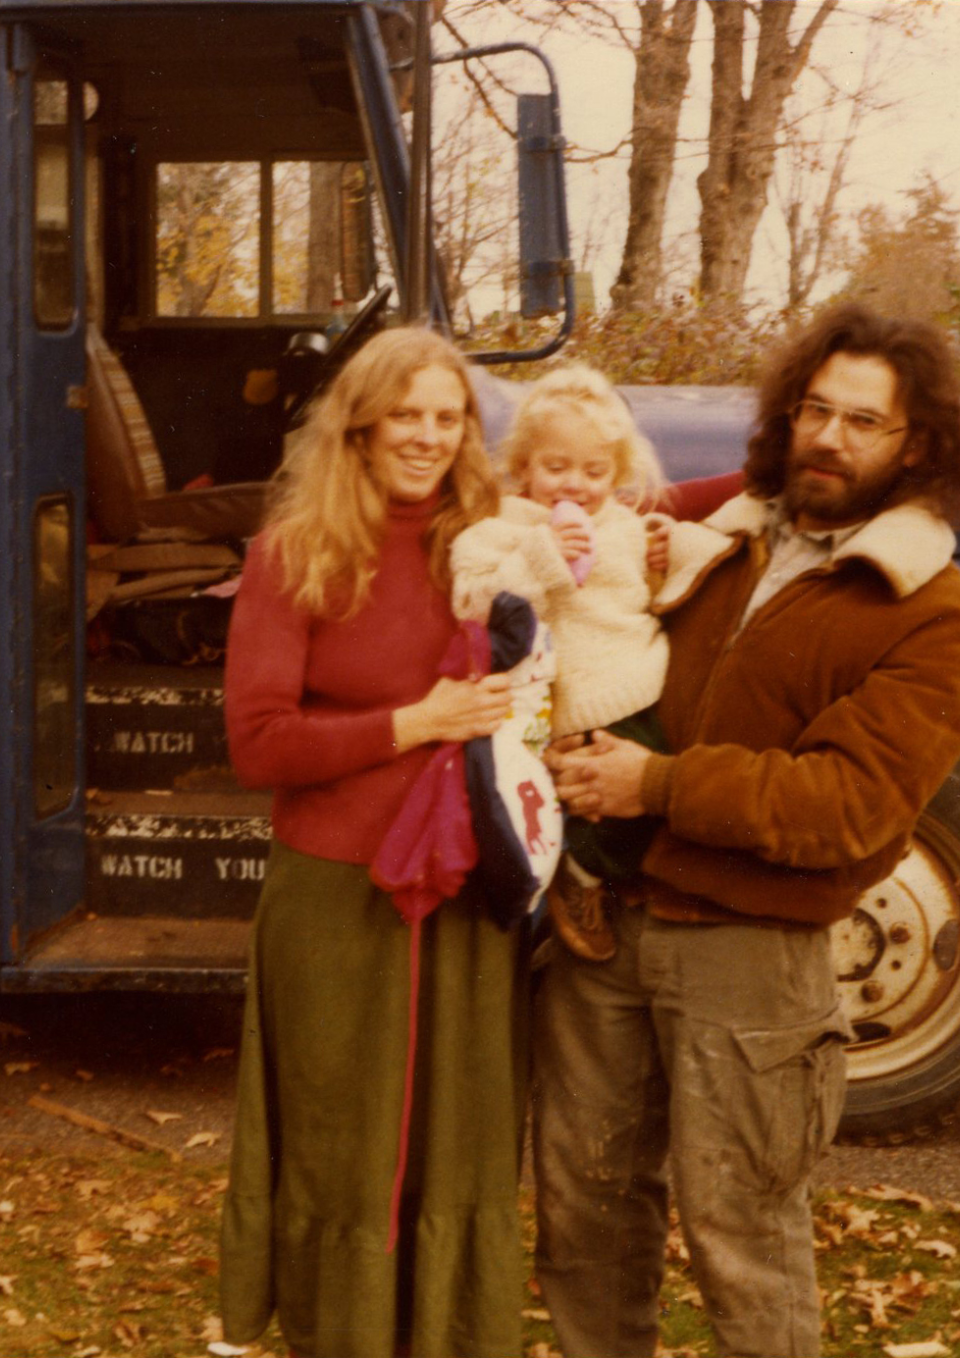 A white woman and man hold a toddler between them. The woman has blond hair and smiles at the camera, the man has long brown hair and a beard and looks unsmiling at the camera. The toddler looks downwards. In the background is a vintage blue school bus.